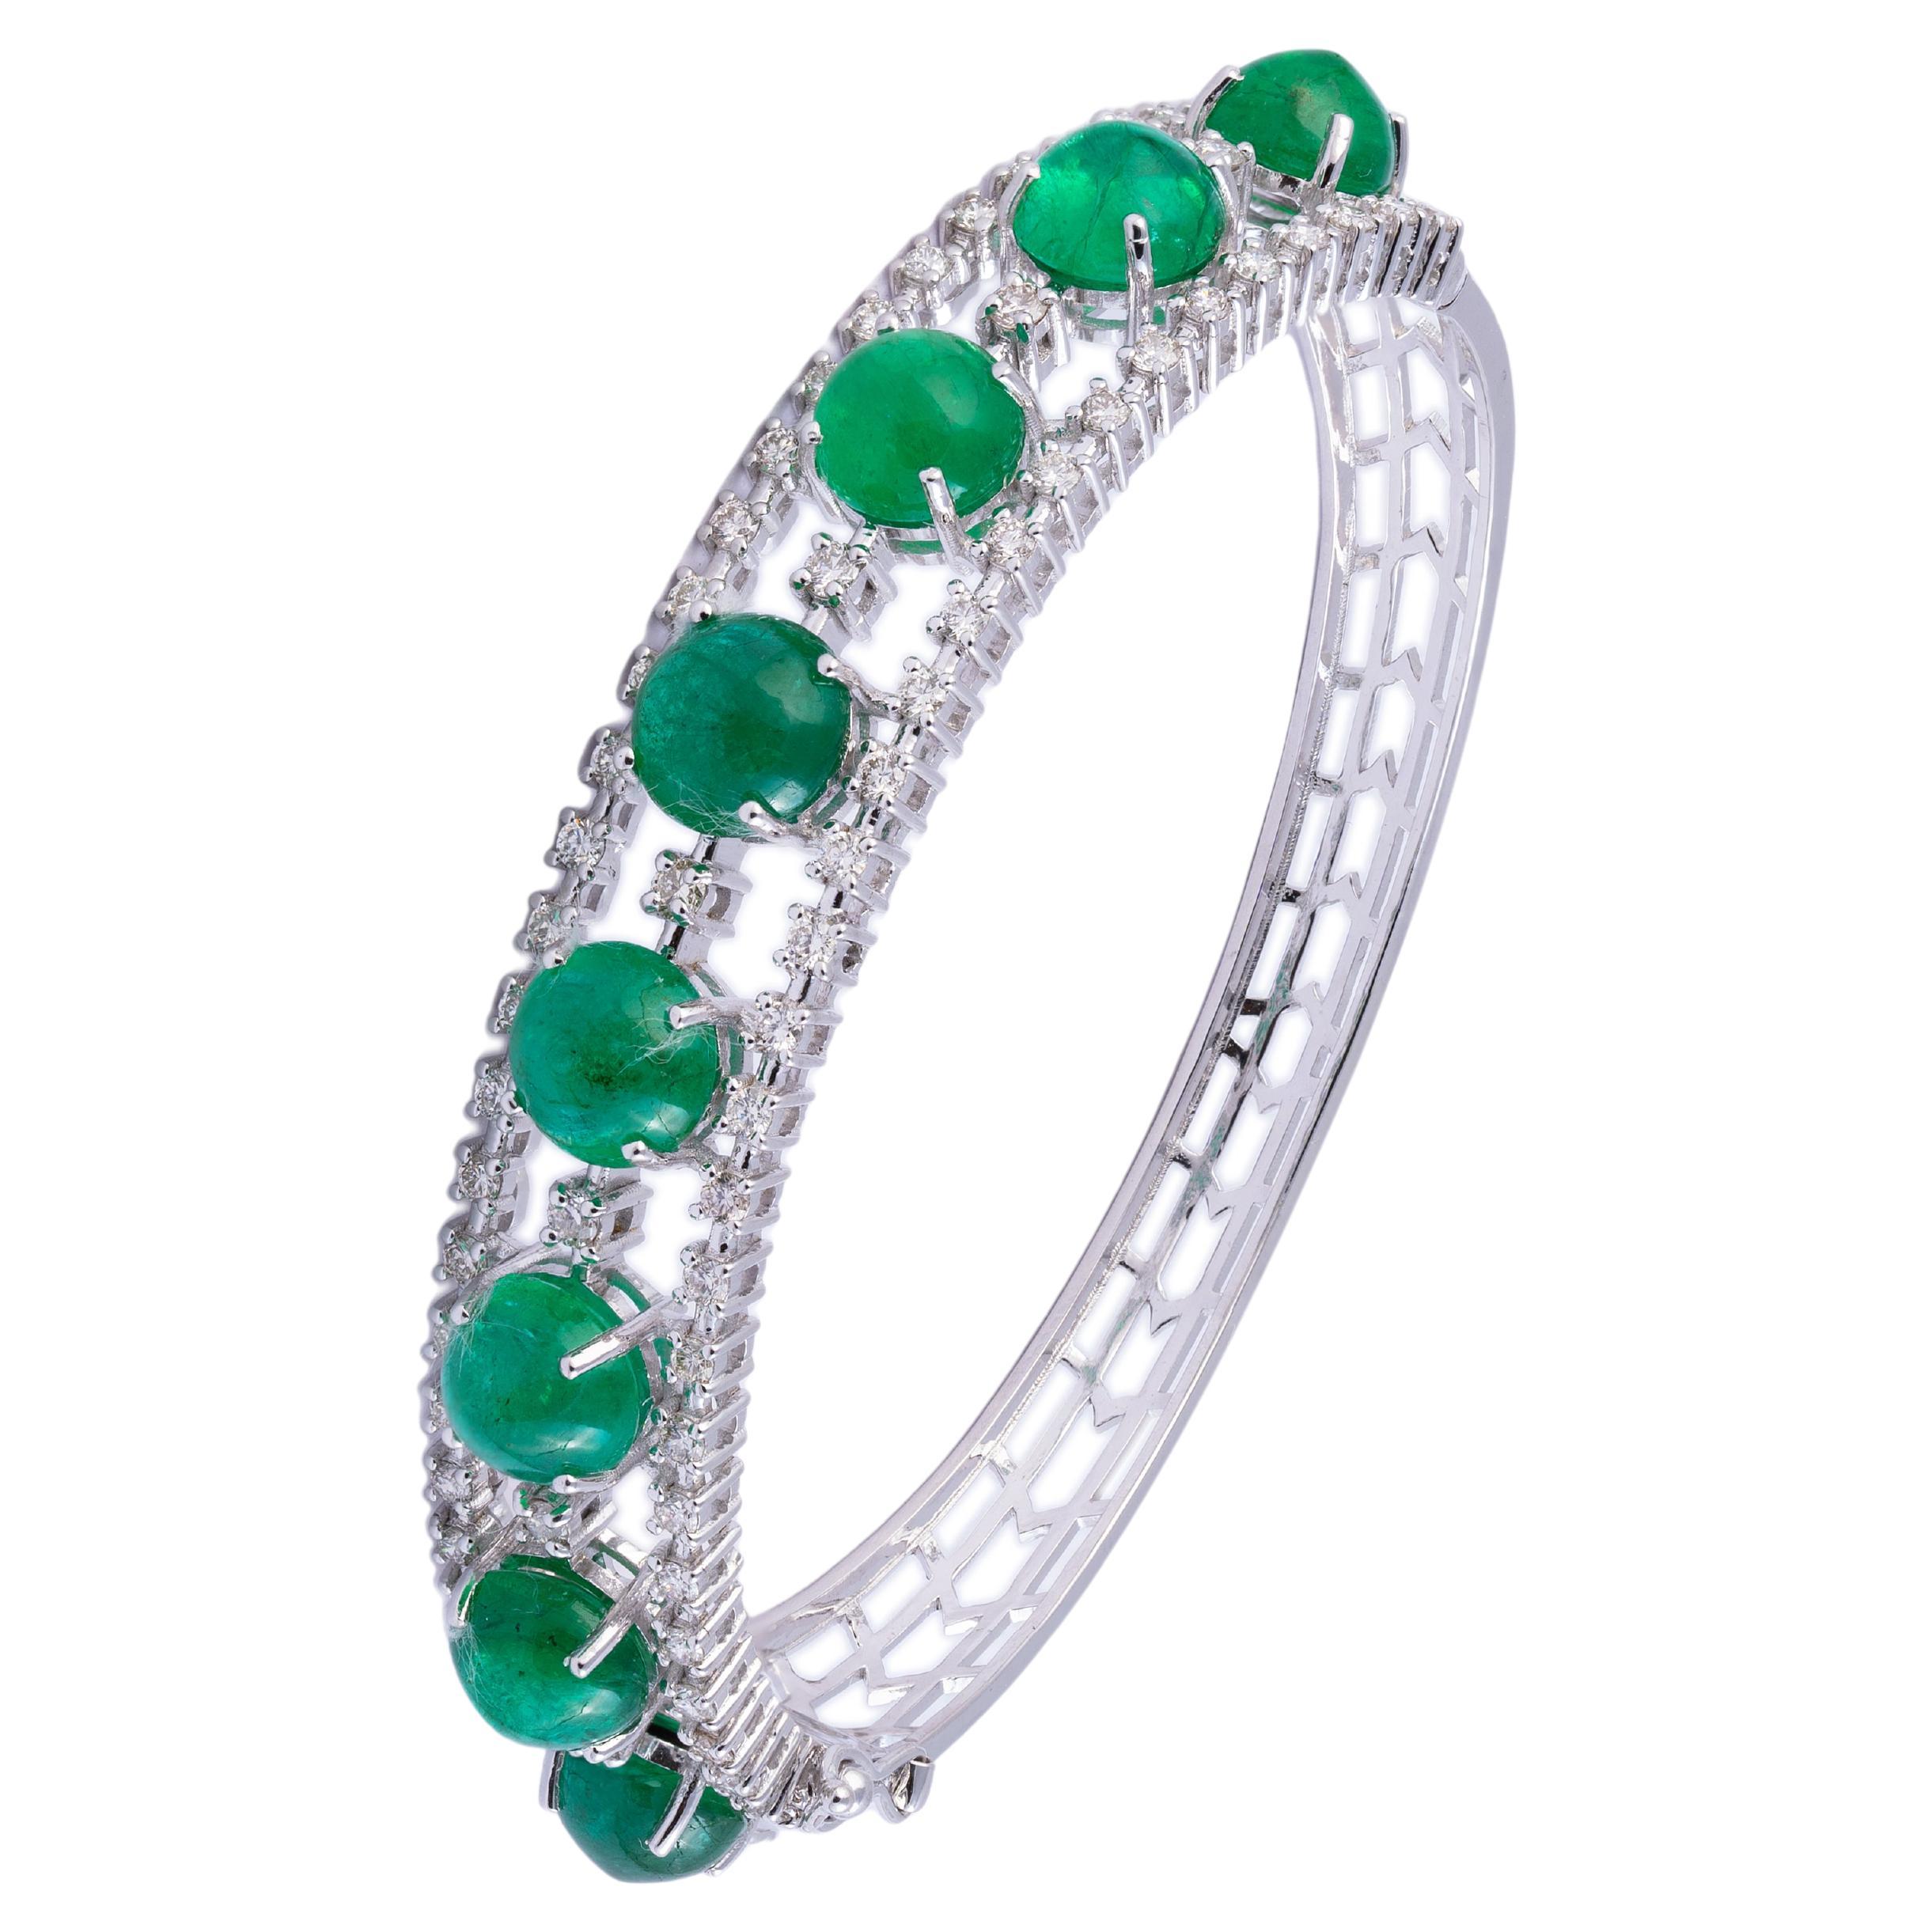 Natural Zambian Emerald 15.18cts and 1.59cts Diamond Bracelet in 14k Gold For Sale